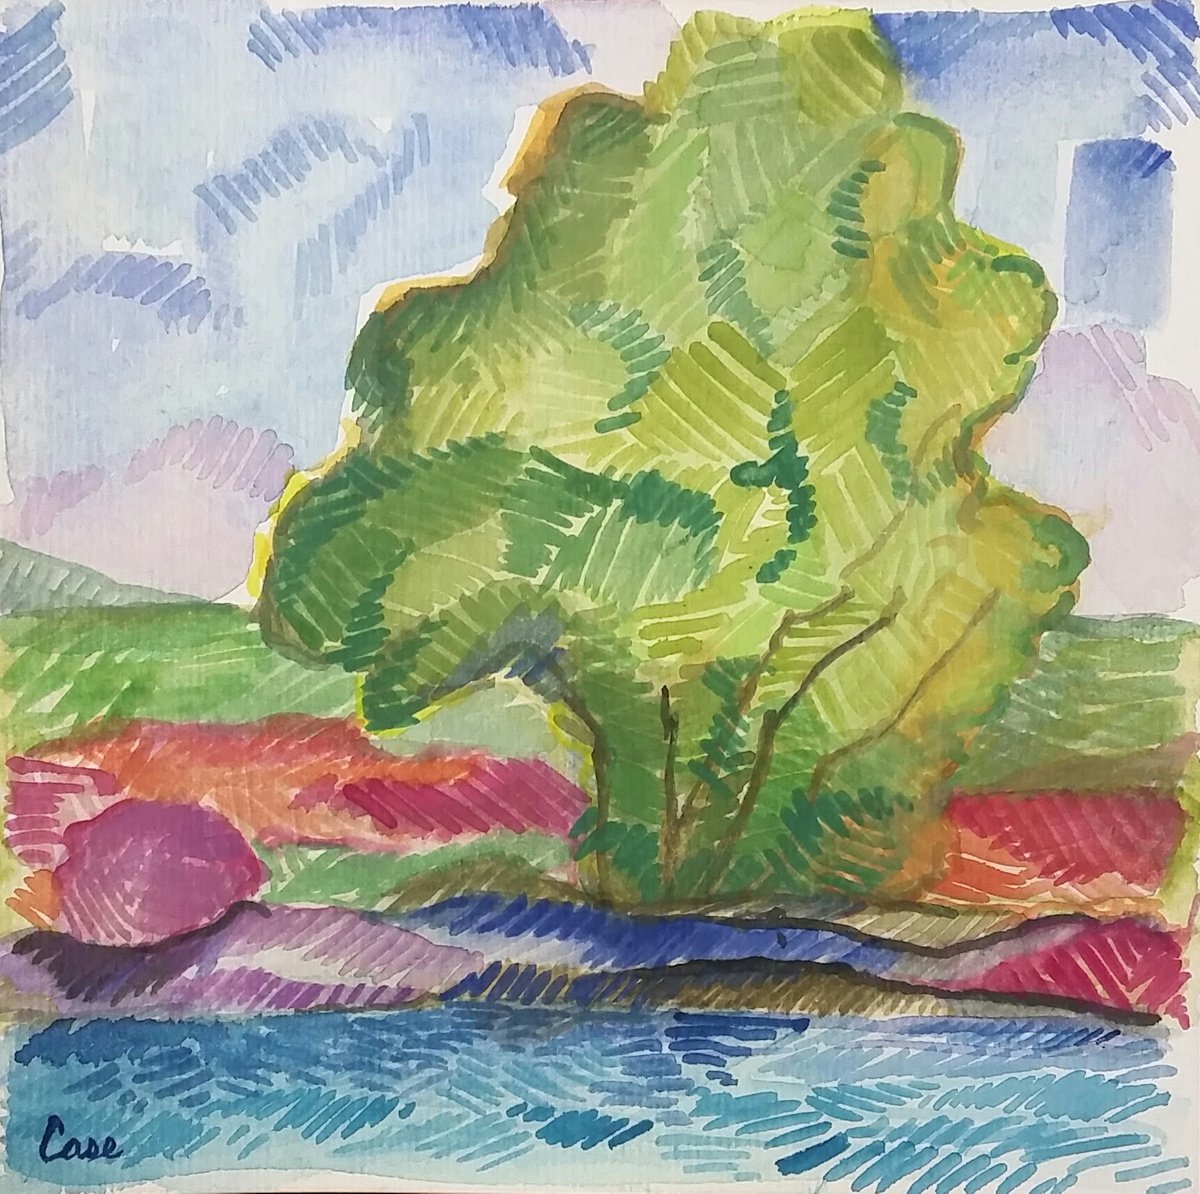 Try - Landscape - Trees - Colorful by Katrina Case